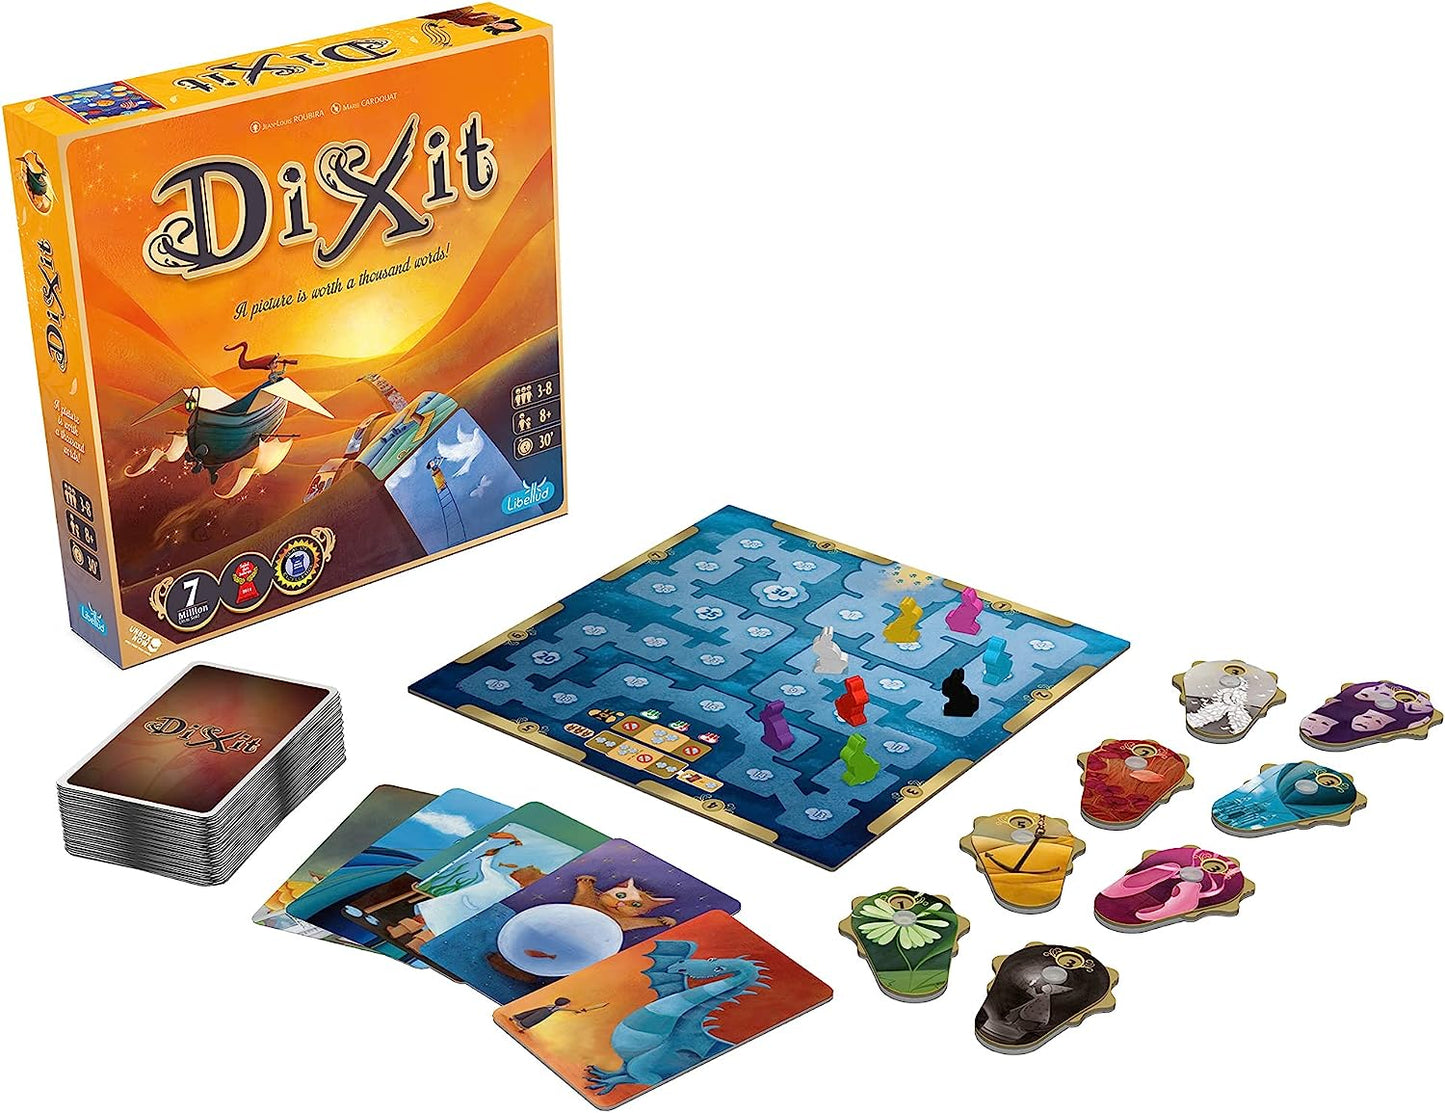 Dixit Board Game base game tabletop game